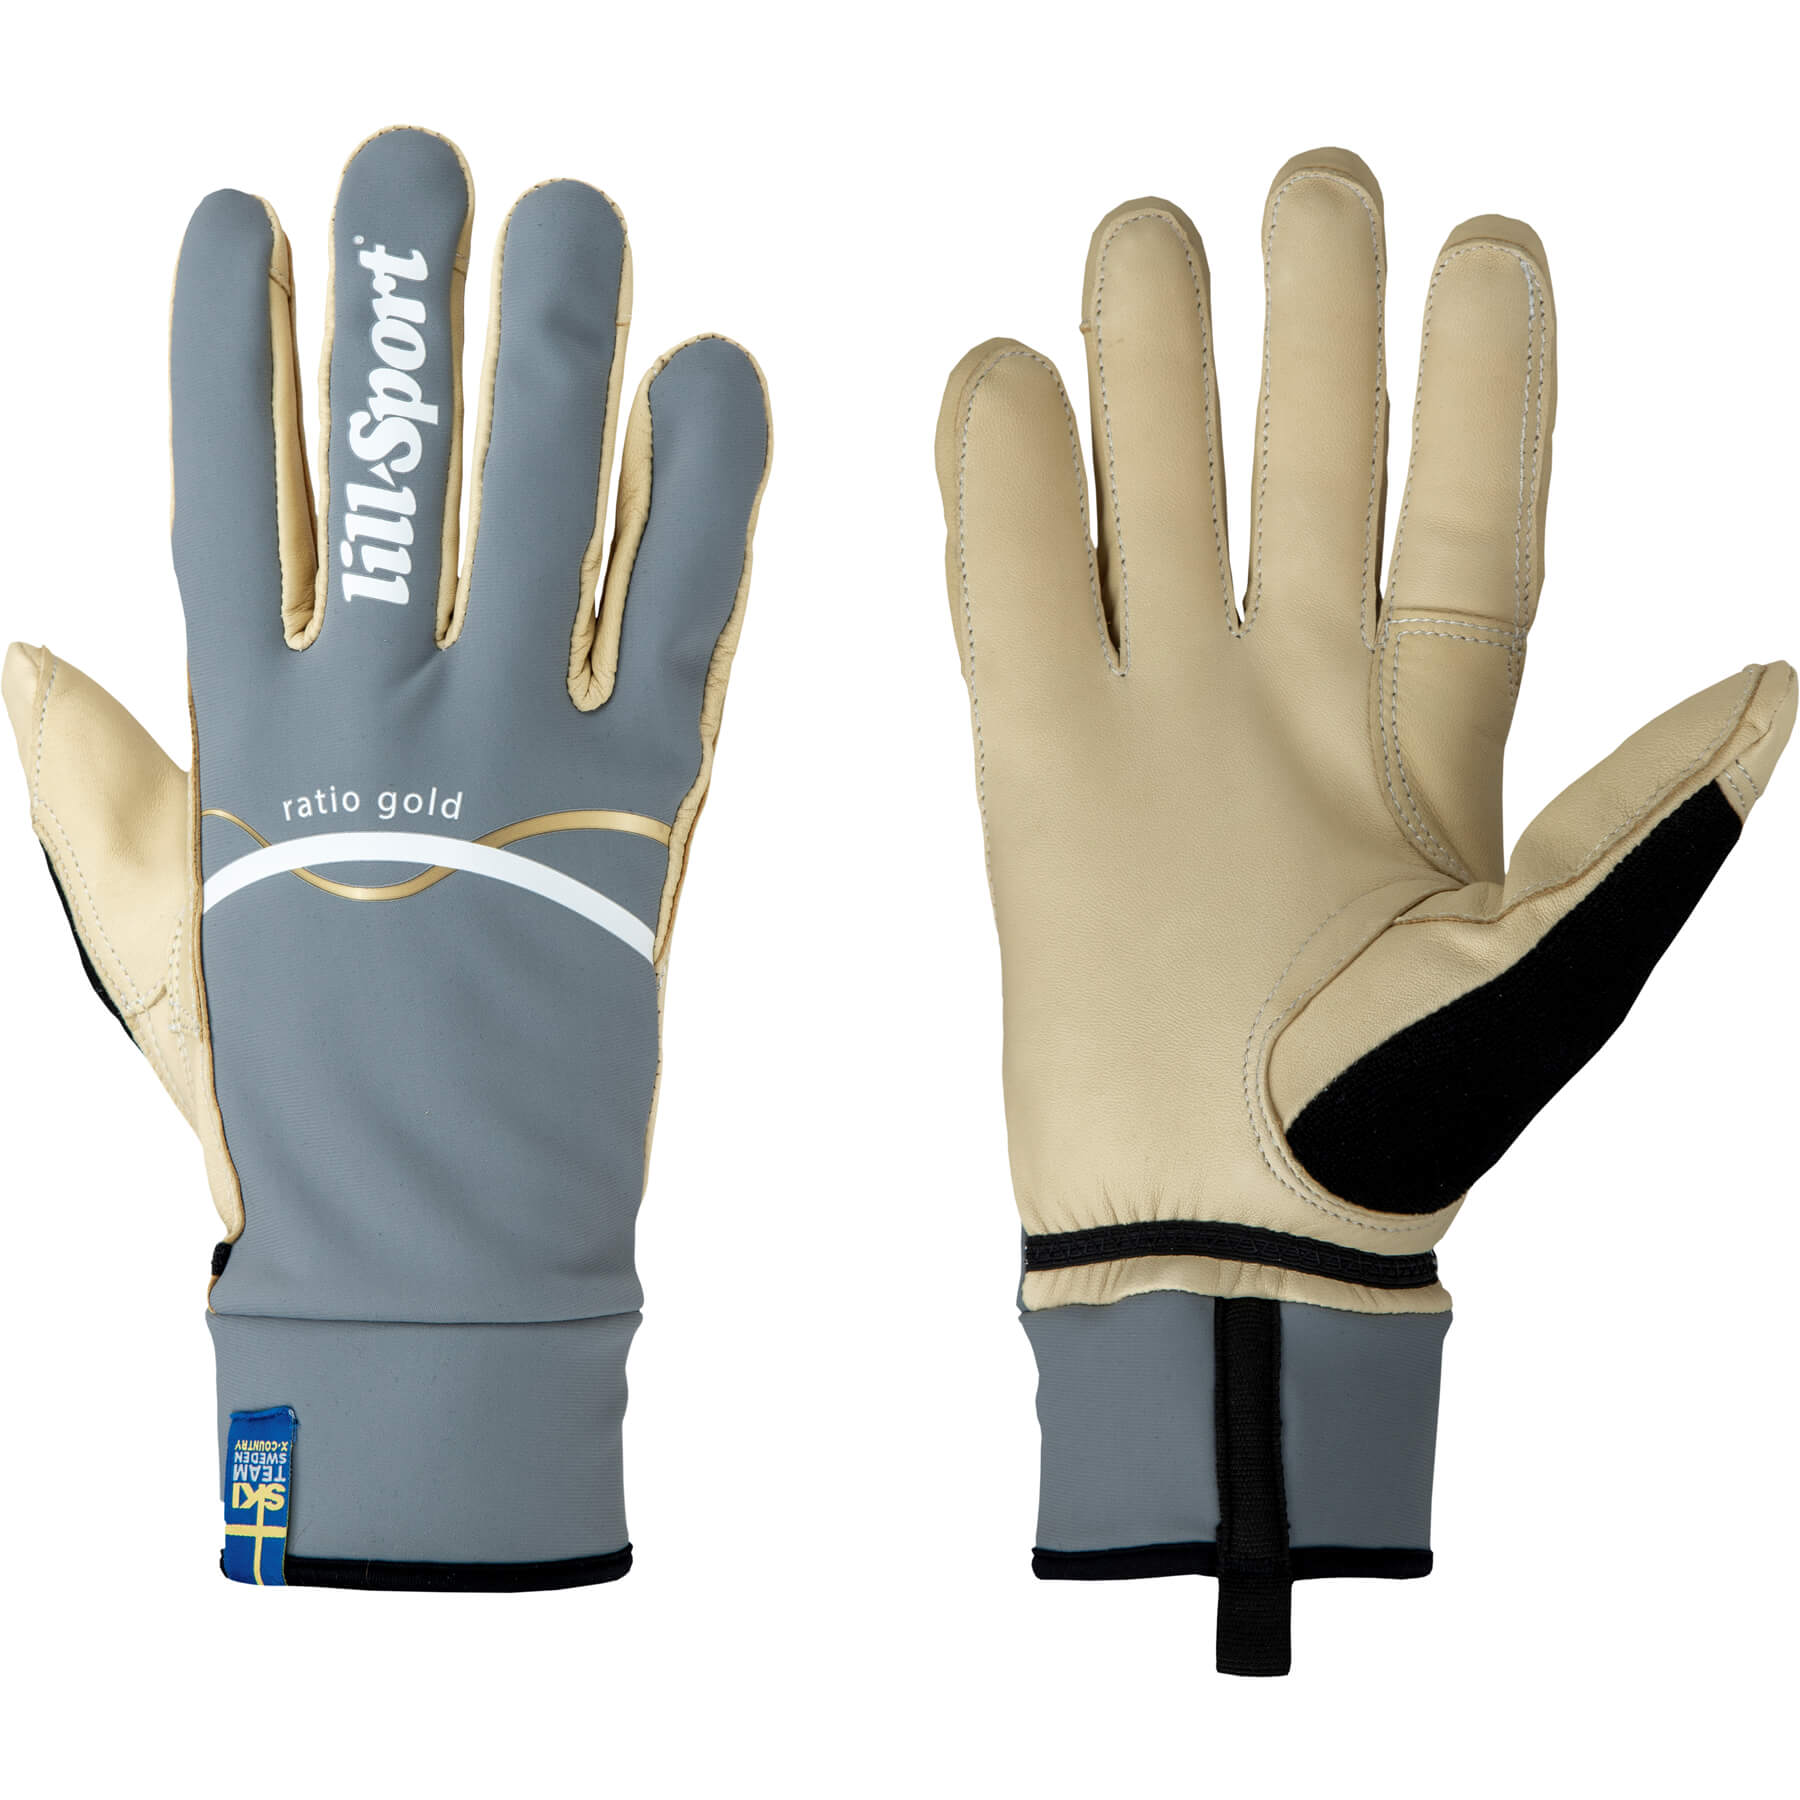 Lill Sport Ratio Gold Unlined Glove